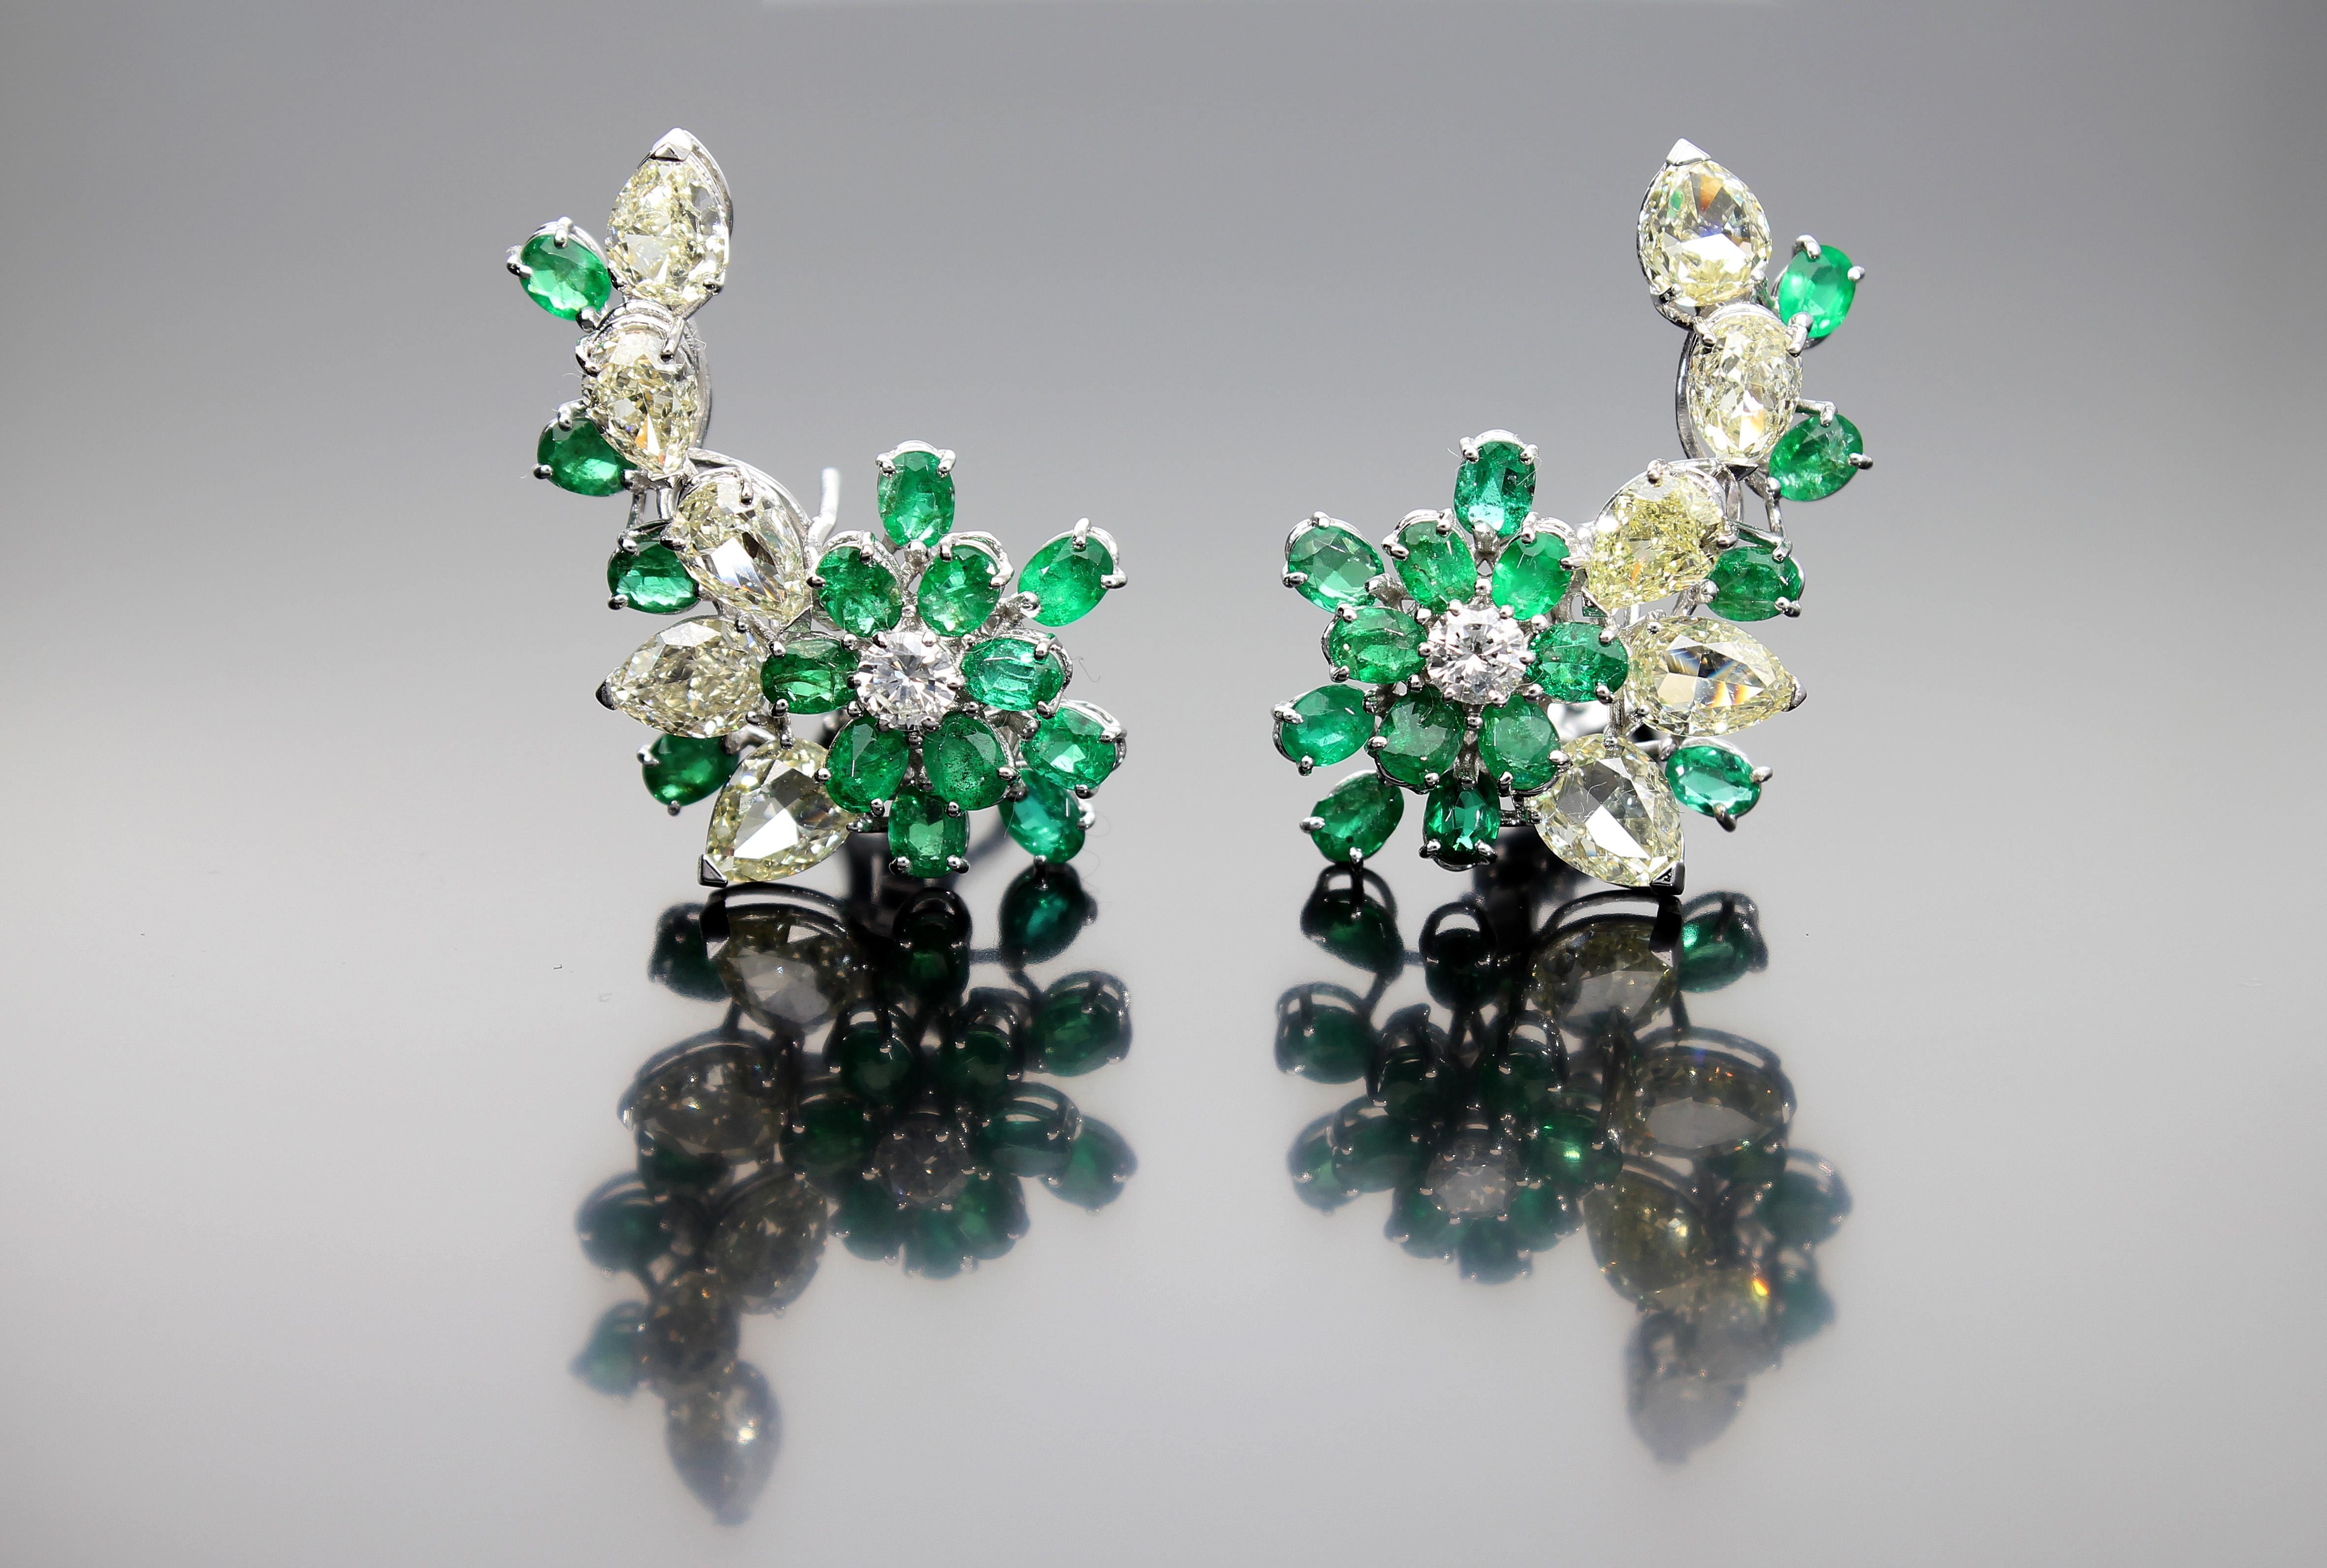 The cluster model earrings with pear-cut diamonds and emeralds, with two brilliant-cut diamonds in the center. 
N ° 10 pear cut diamonds total weight 8.50 ct
N ° 2 brilliant cut diamonds total weight 0.48 ct 
N ° 30 oval cut emeralds total weight